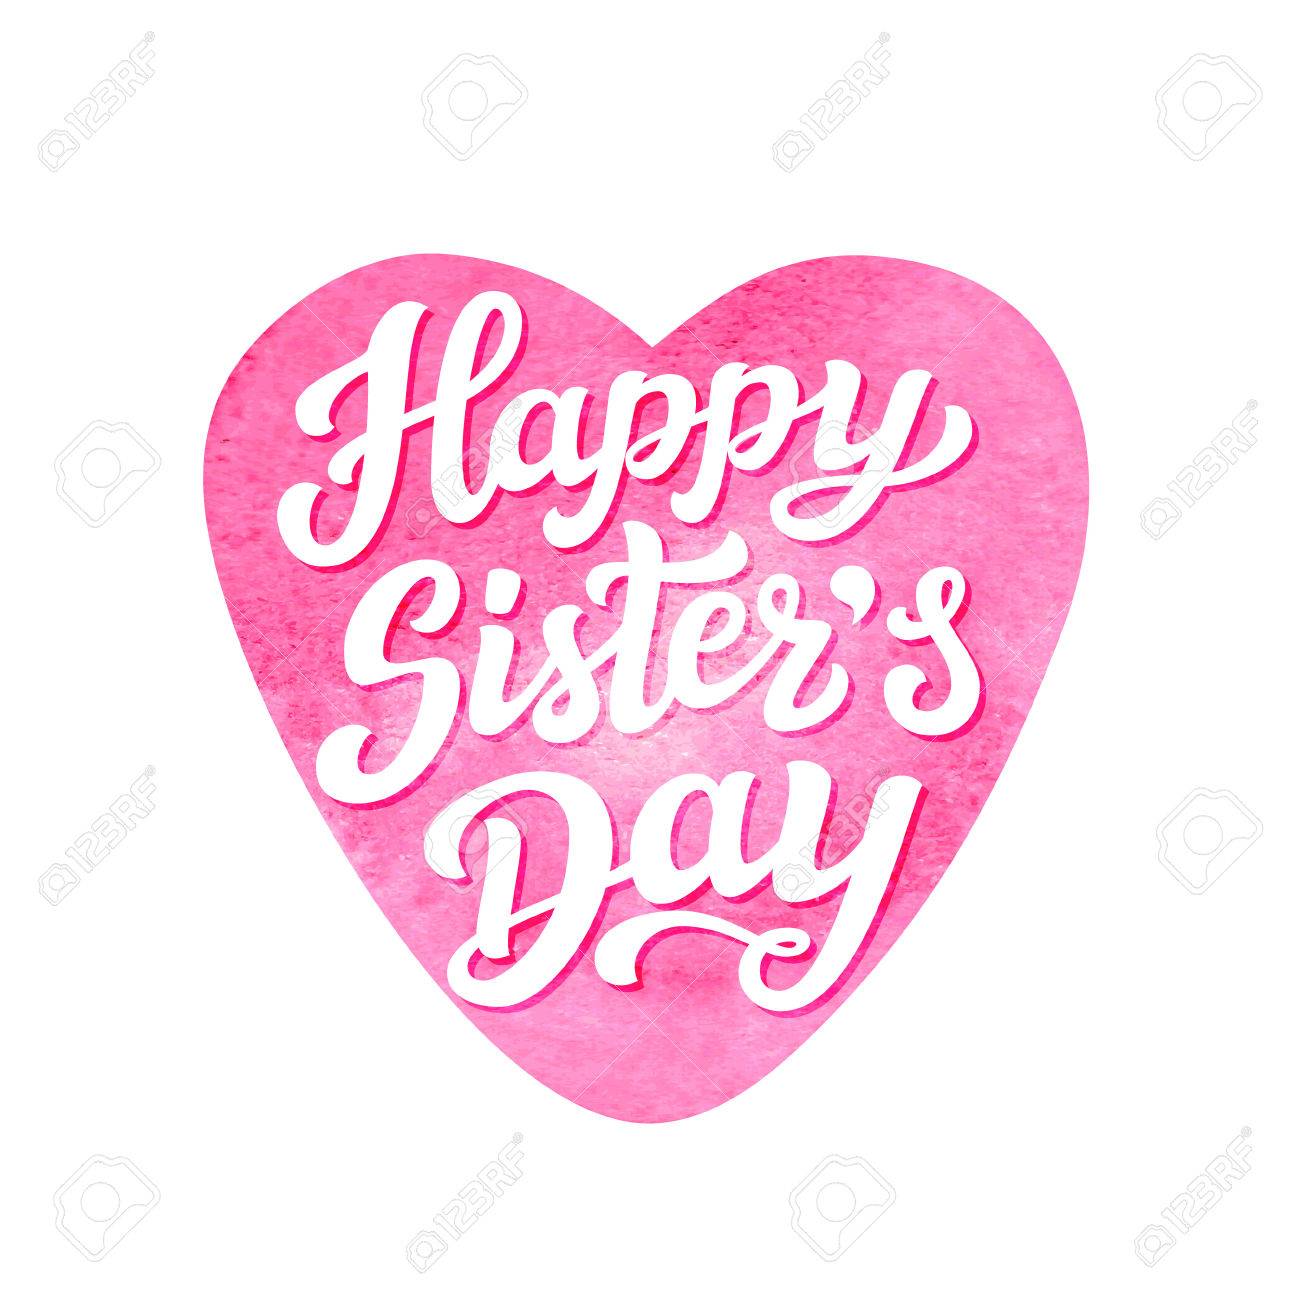 Happy Sisters Day August Holiday Hand Drawn Typography Text